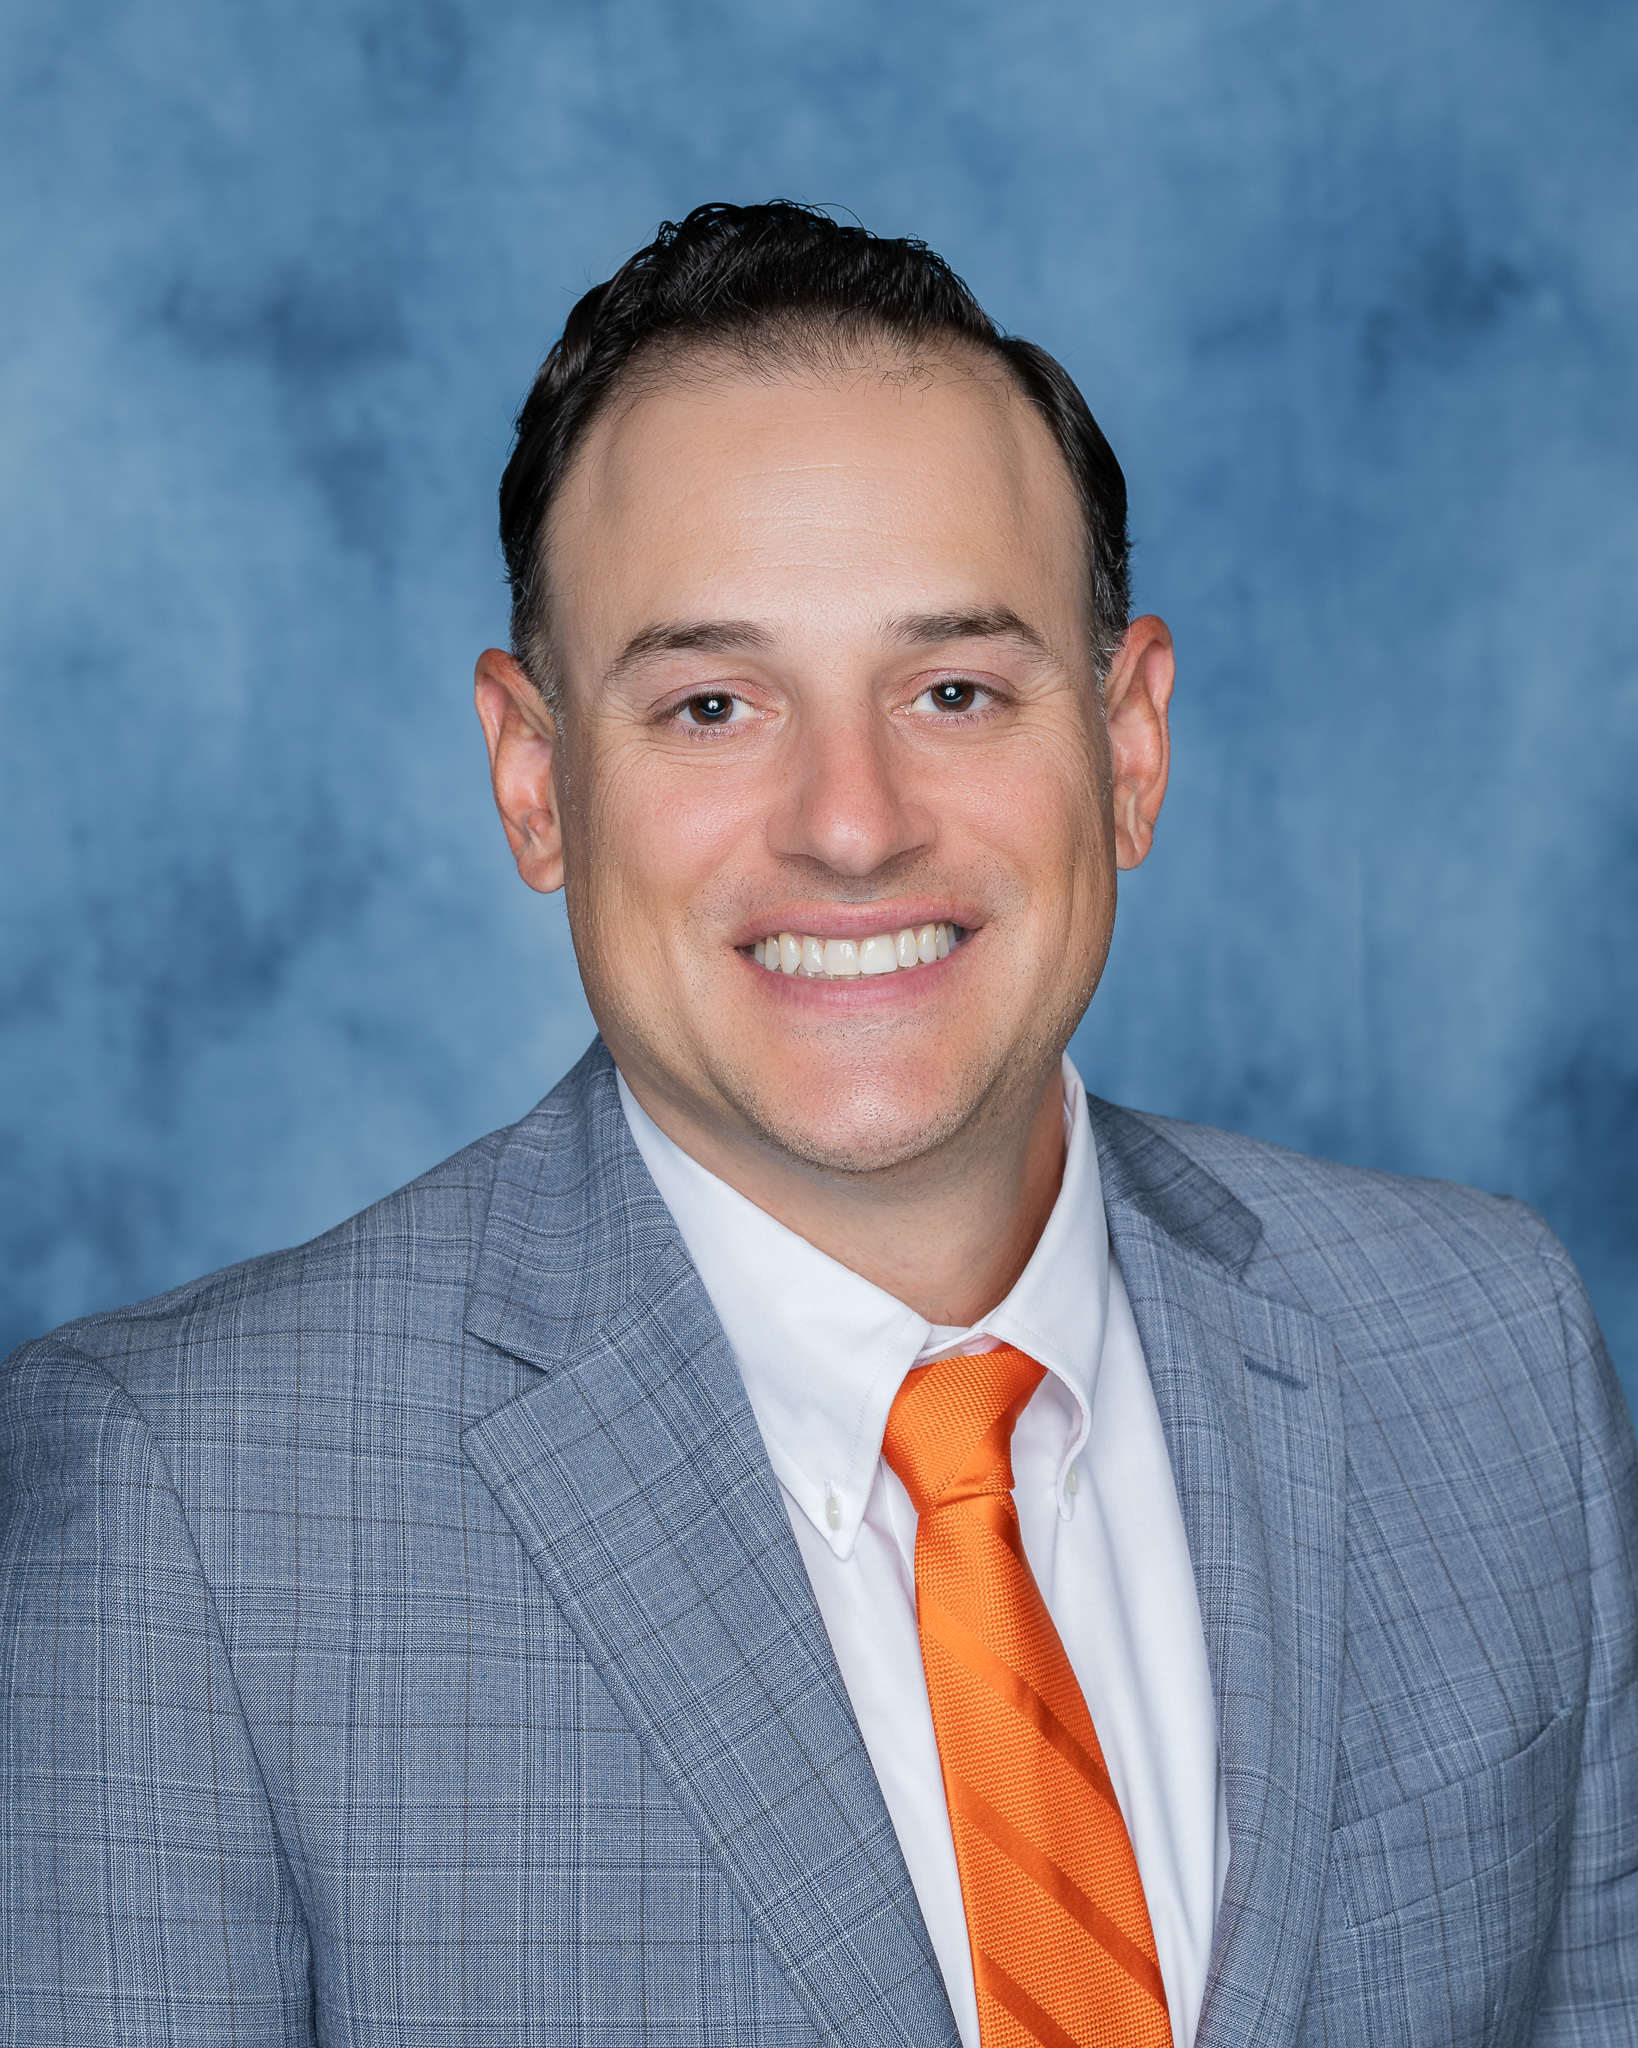 Corporate headshot of FISERV Associate, against a clean backdrop, exuding confidence and approachability. Crisp attire and a friendly smile convey a polished and competent professional image, perfect for LinkedIn profiles and business websites.